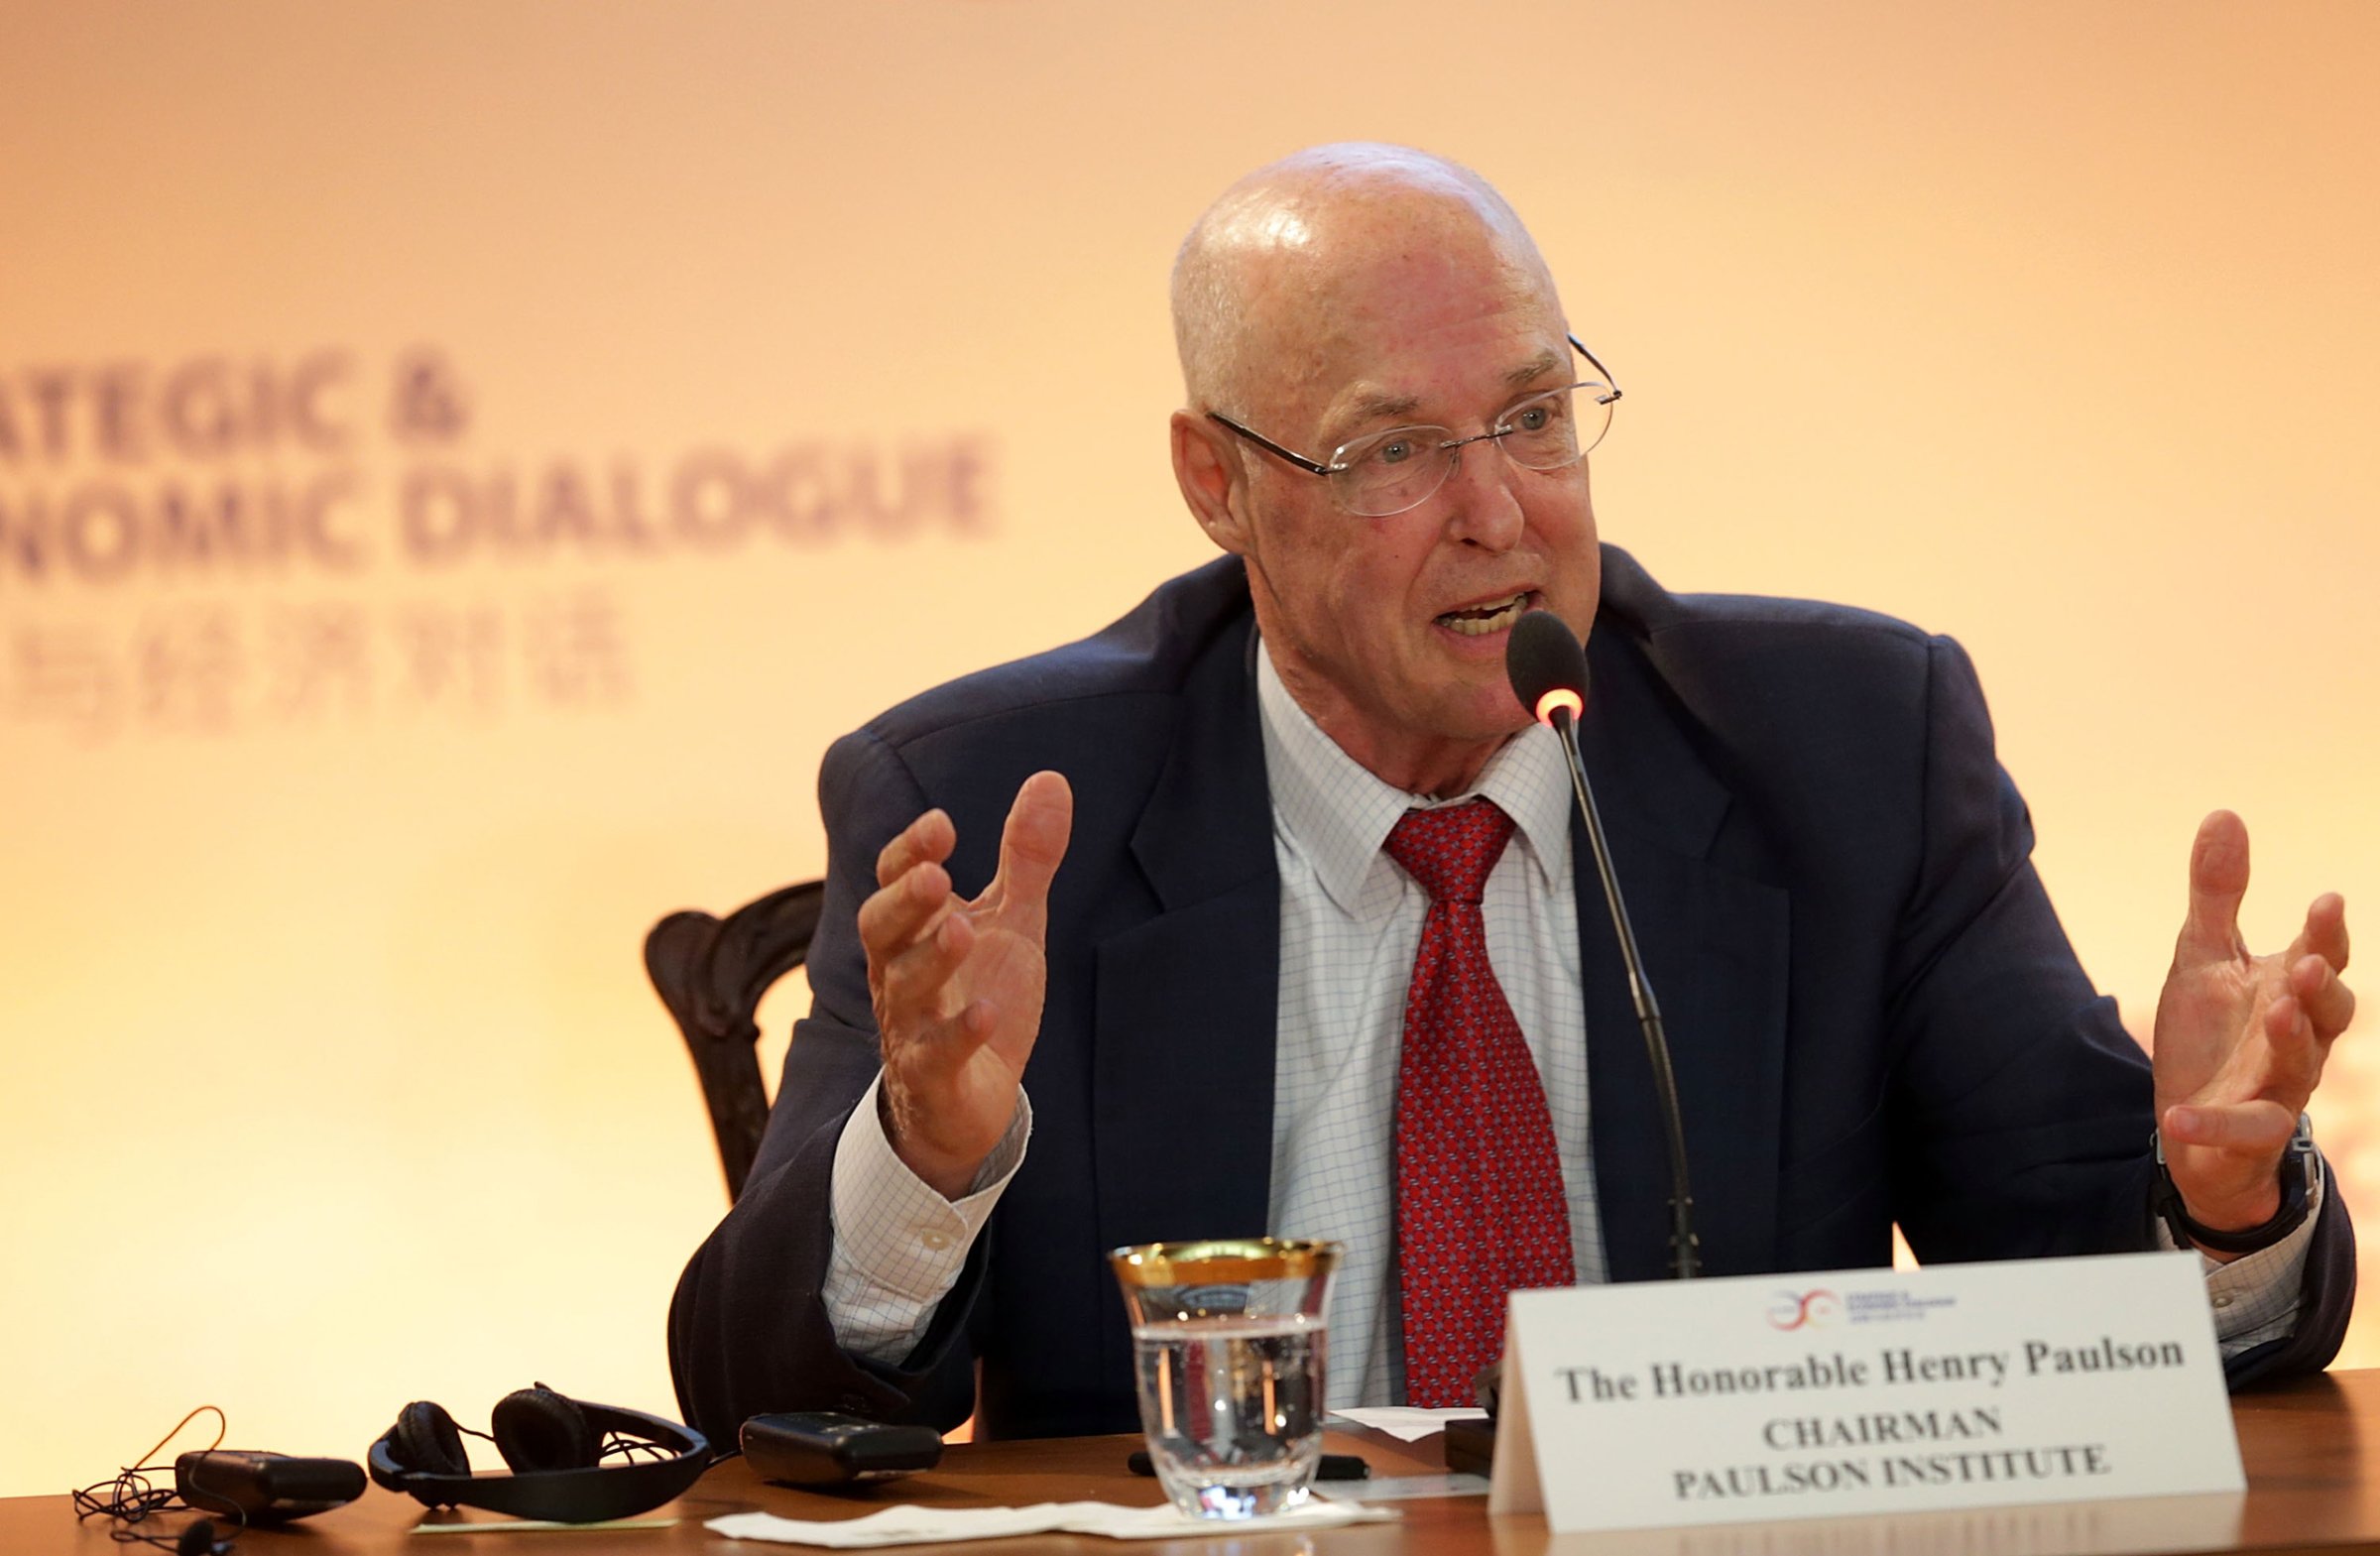 Former Secretary of the Treasury Henry Paulson speaks during a panel discussion on energy and environment cooperation during the Strategic and Economic Dialogue in Washington, D.C. on June 23, 2015.